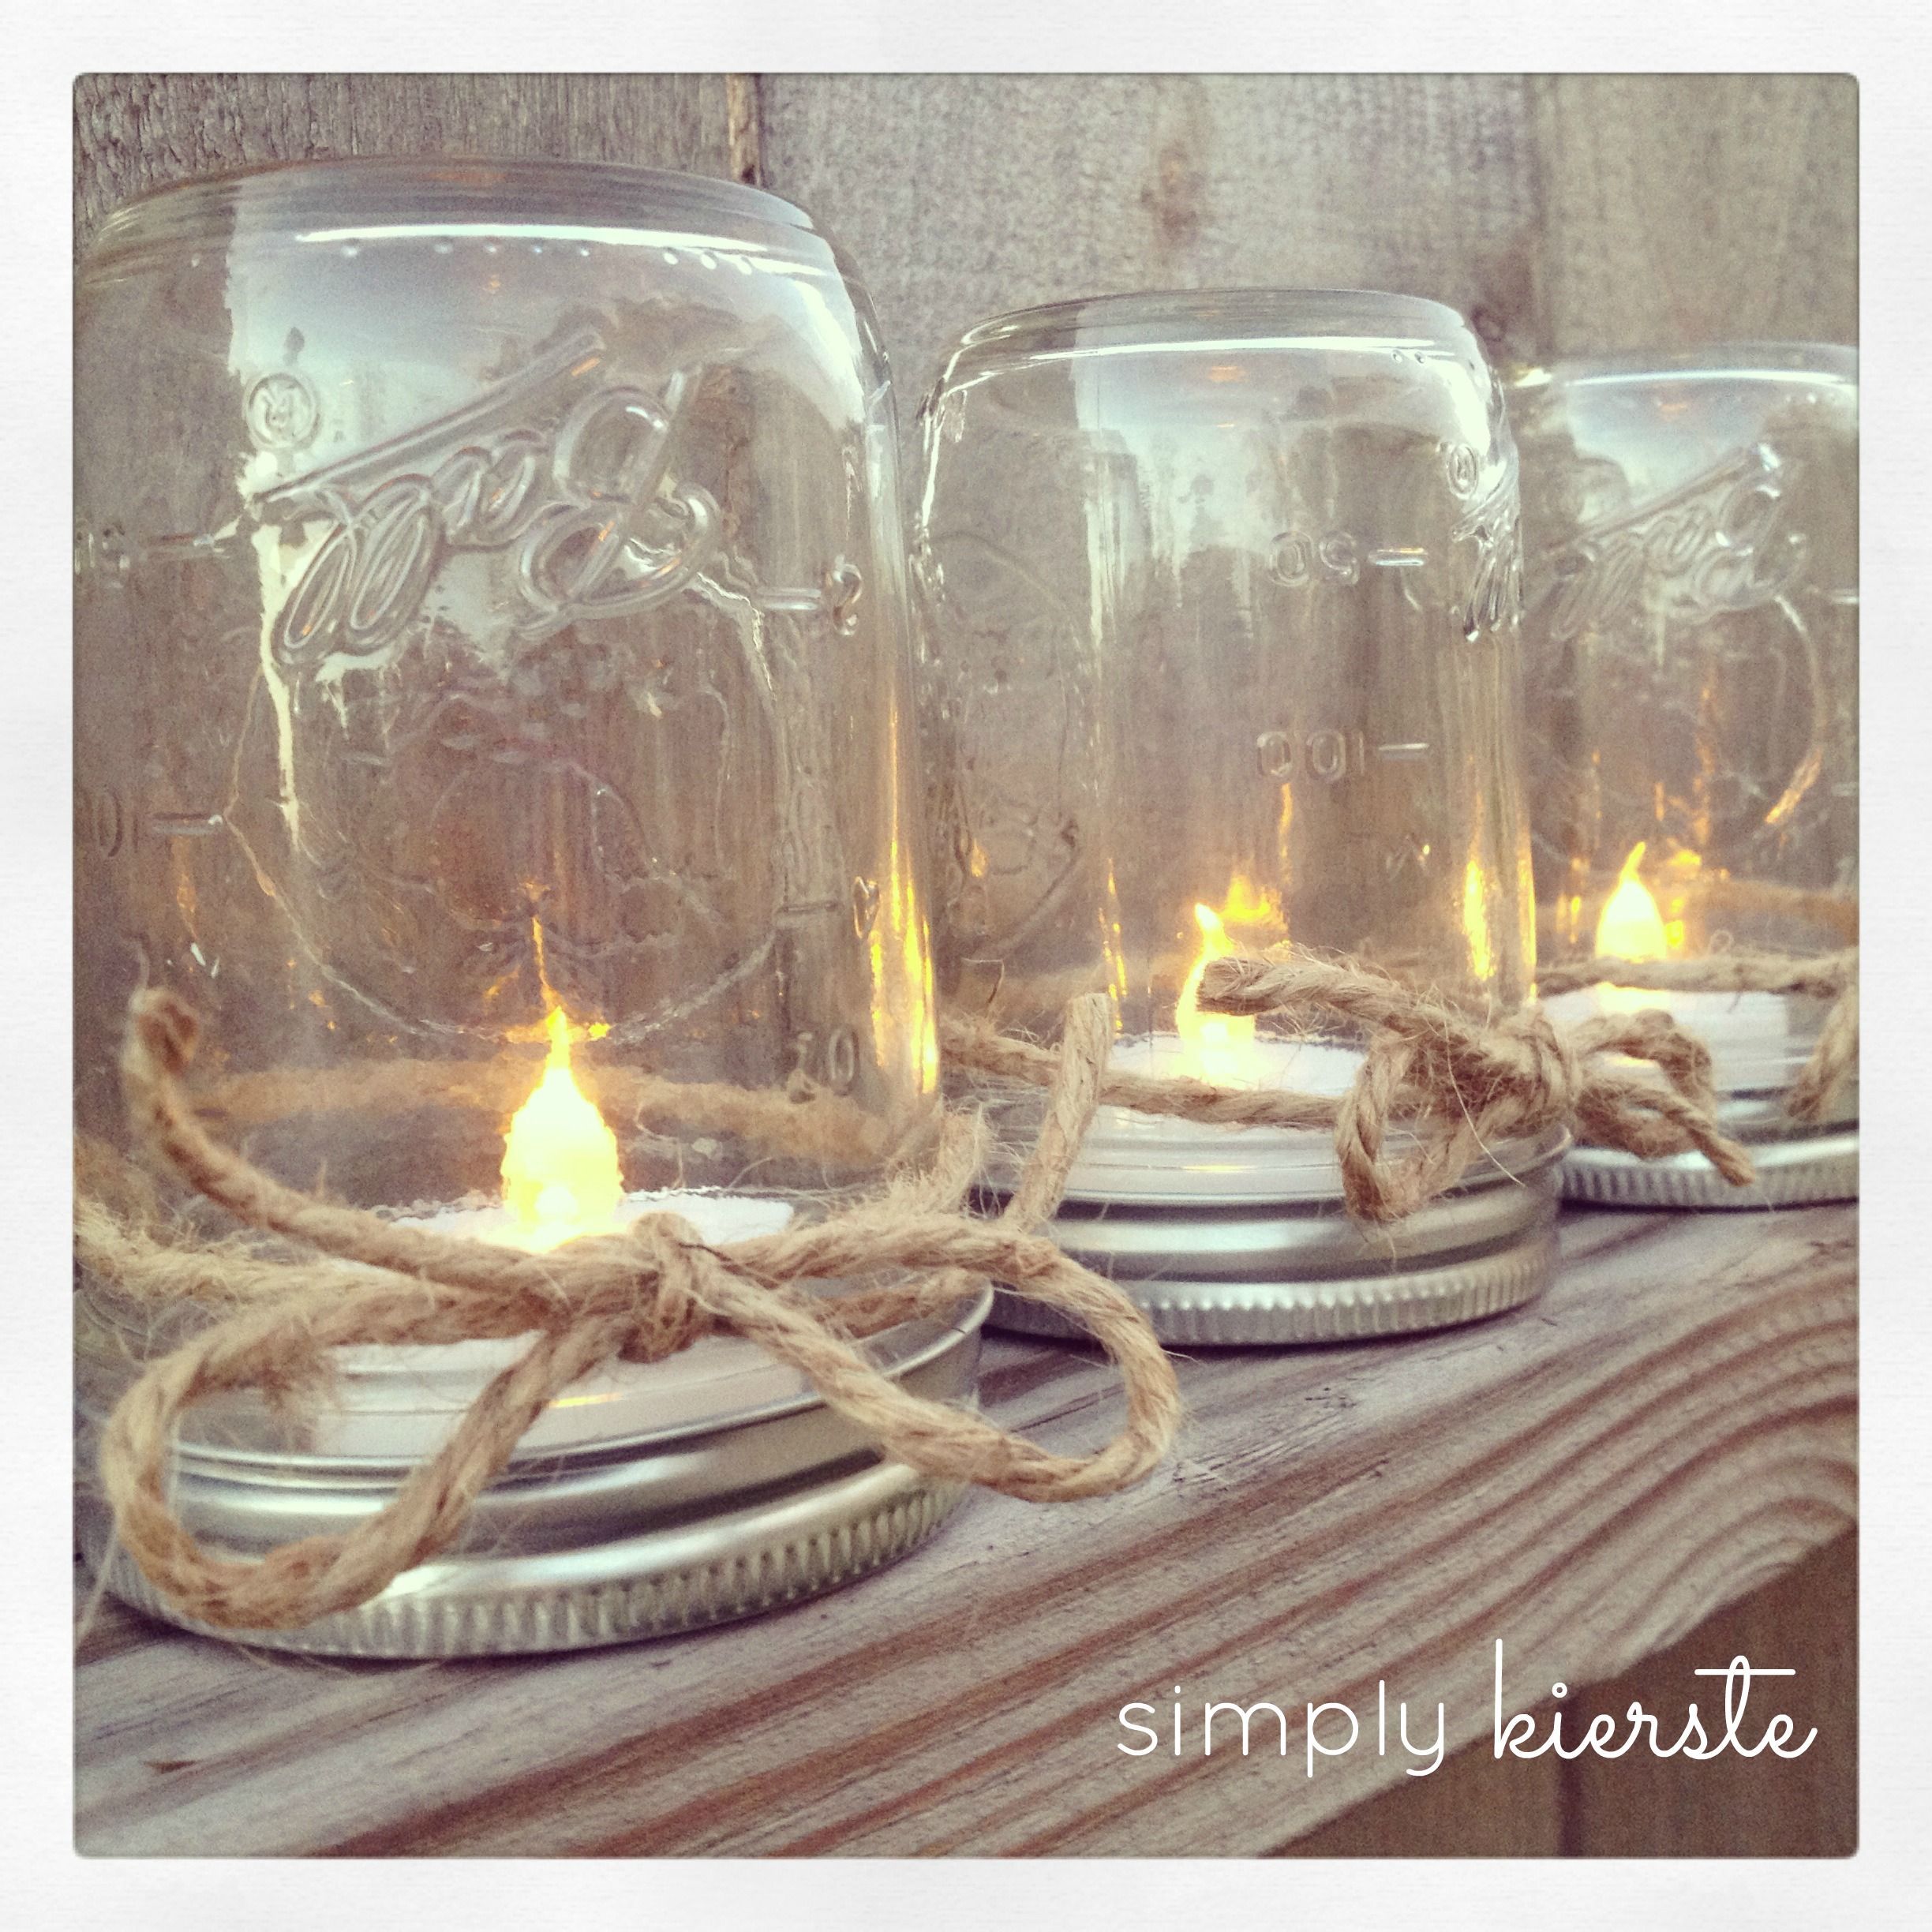 tabletop lanterns for wedding centerpieces | You will see how simple this lantern–literally 3 minutes. LOVE that!